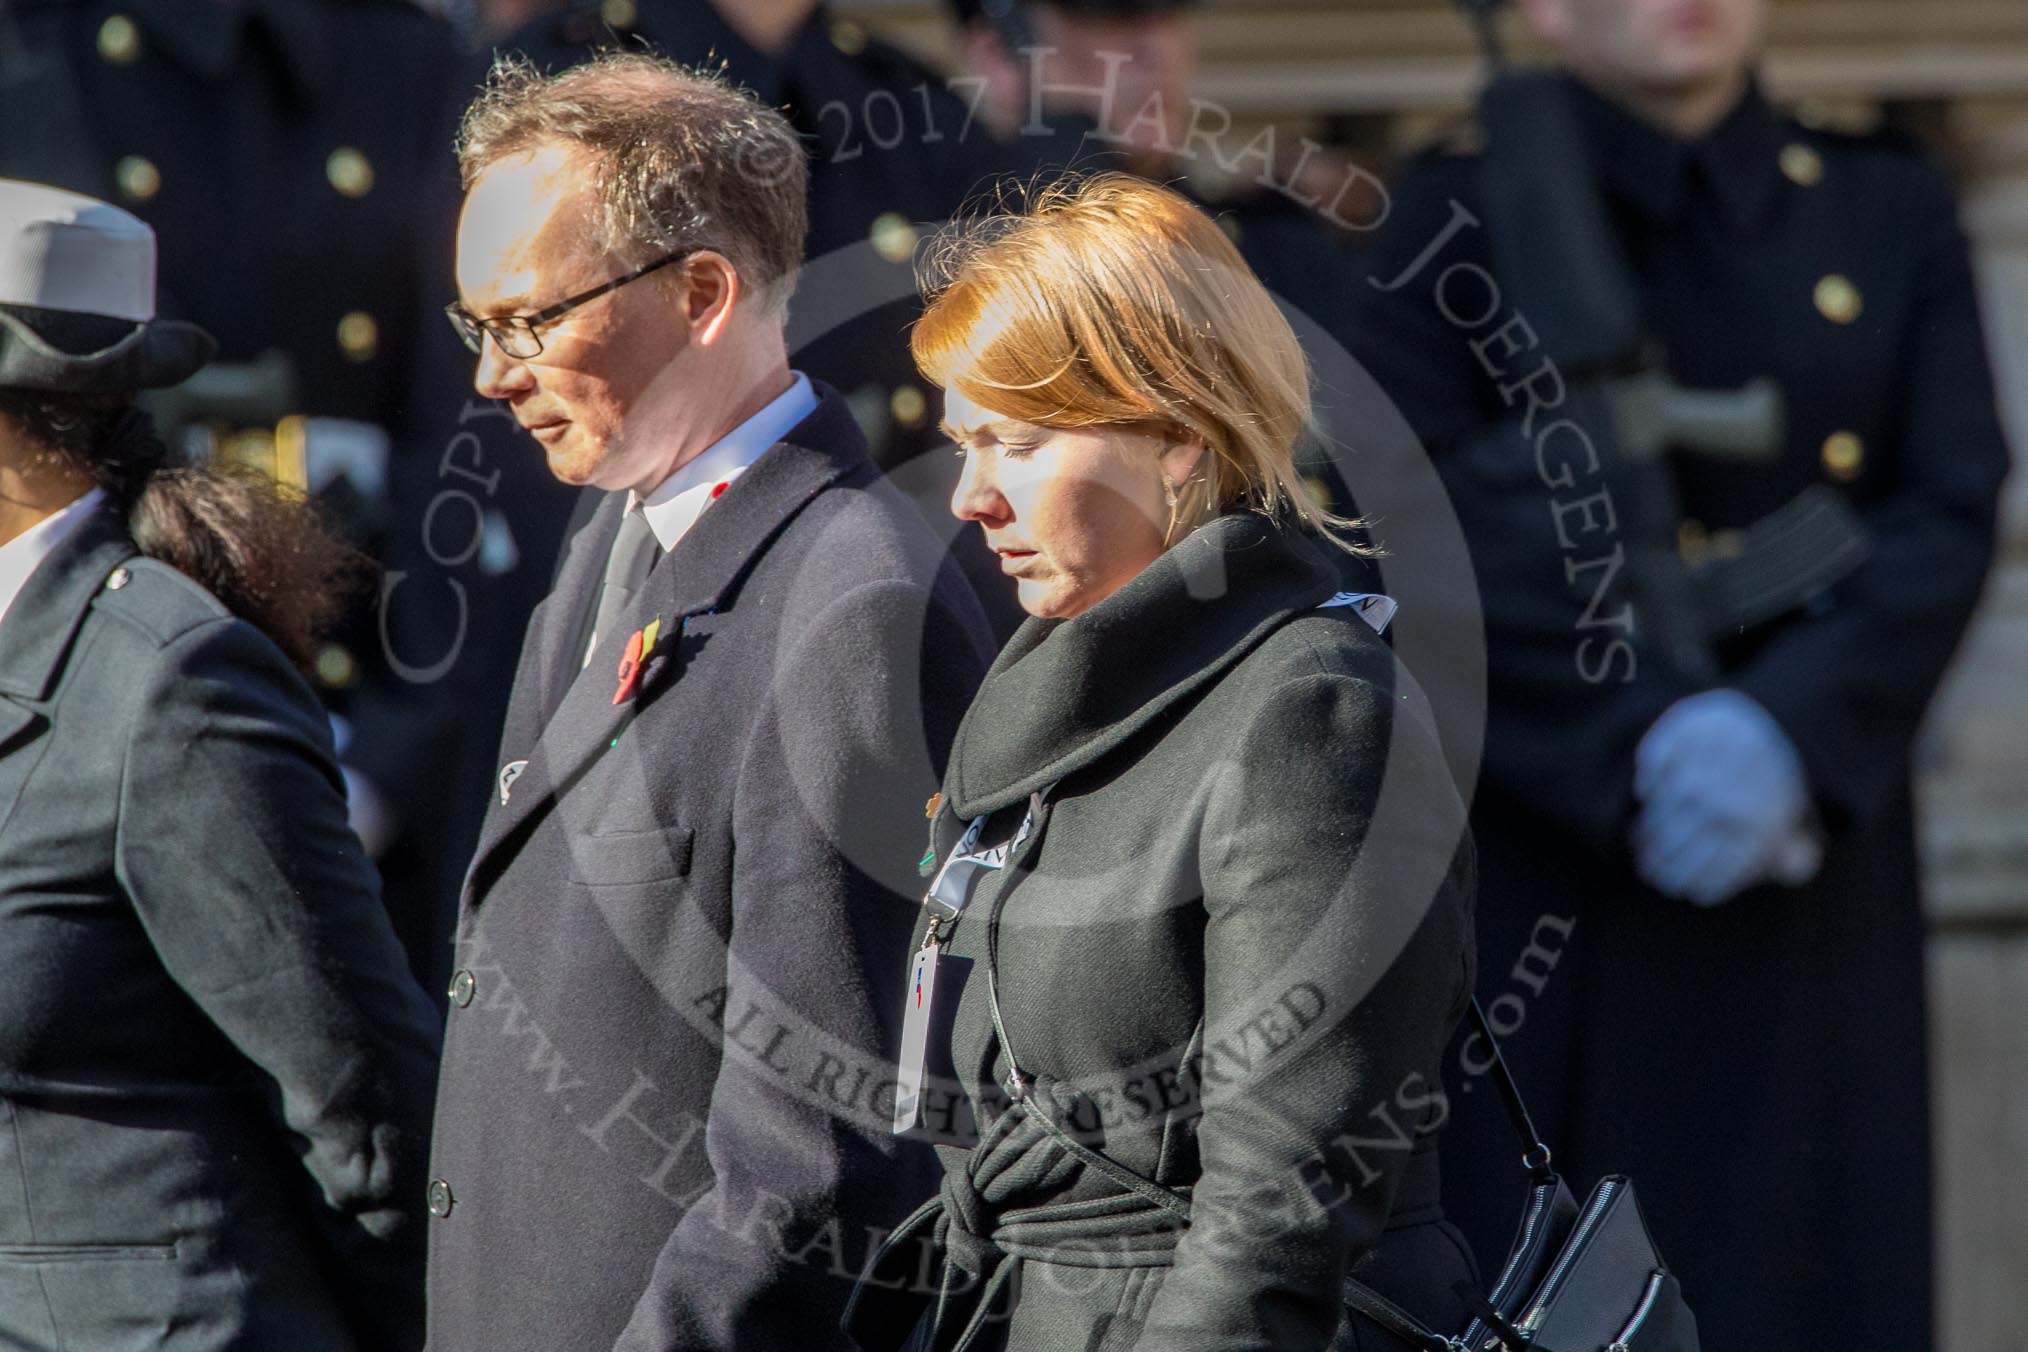 The British Resistance - Coleshill Auxiliary Research Team (Group D25, 14 members) during the Royal British Legion March Past on Remembrance Sunday at the Cenotaph, Whitehall, Westminster, London, 11 November 2018, 12:24.